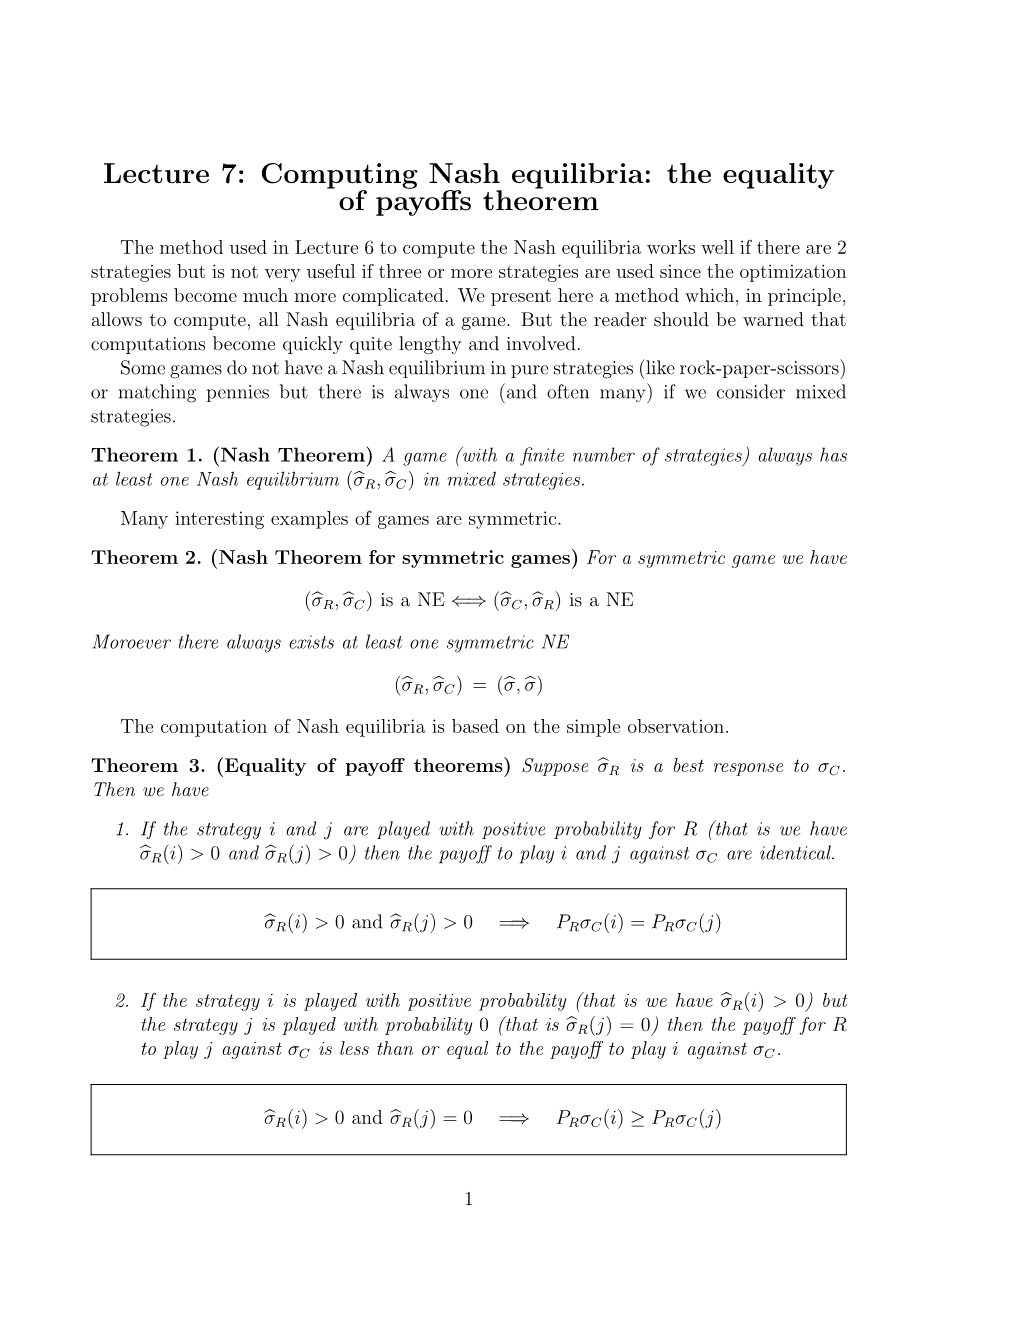 Computing Nash Equilibria: the Equality of Payoﬀs Theorem